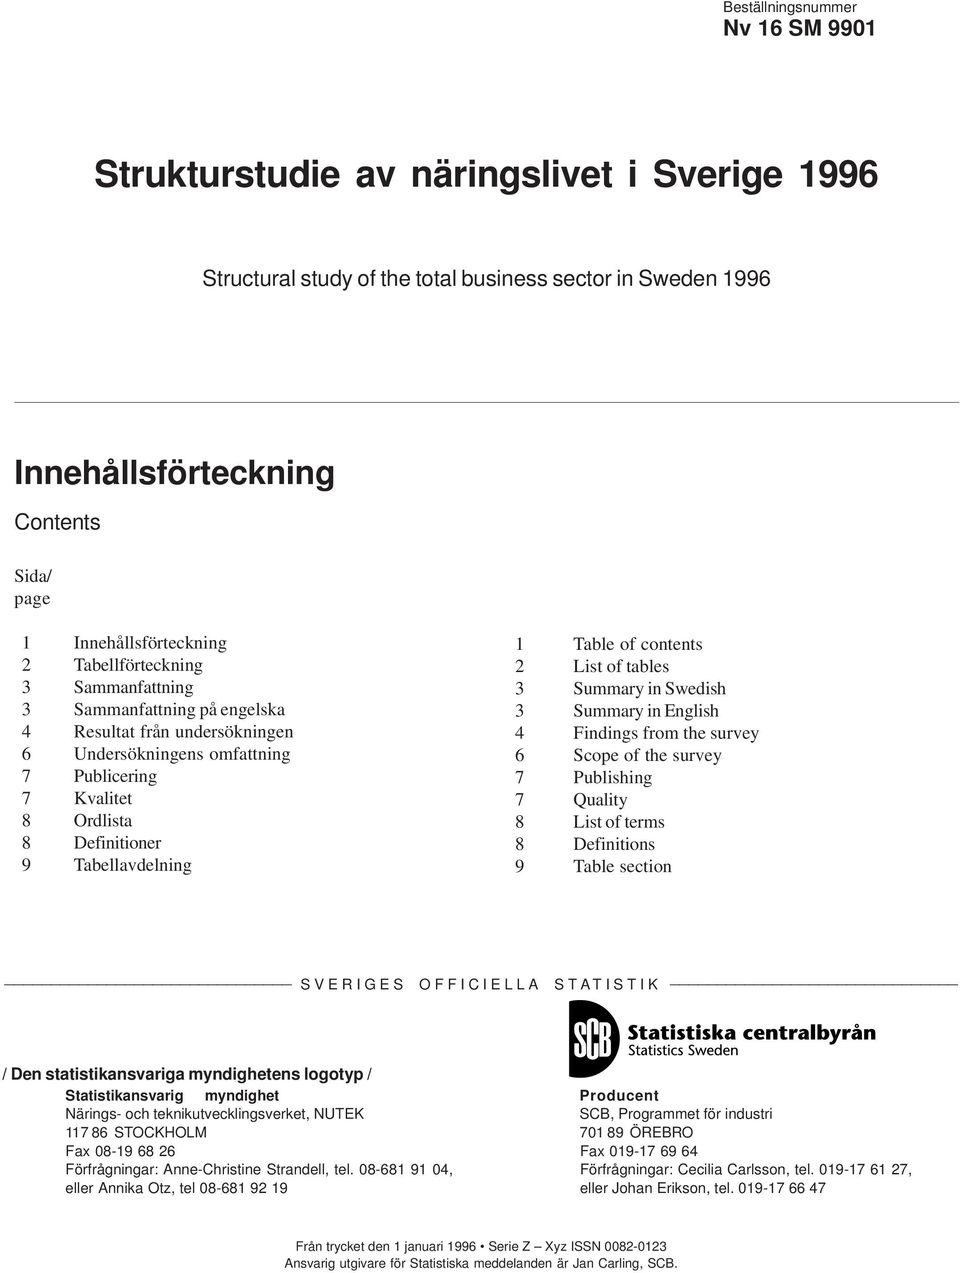 Tabellavdelning 1 Table of contents 2 List of tables 3 Summary in Swedish 3 Summary in English 4 Findings from the survey 6 Scope of the survey 7 Publishing 7 Quality 8 List of terms 8 Definitions 9